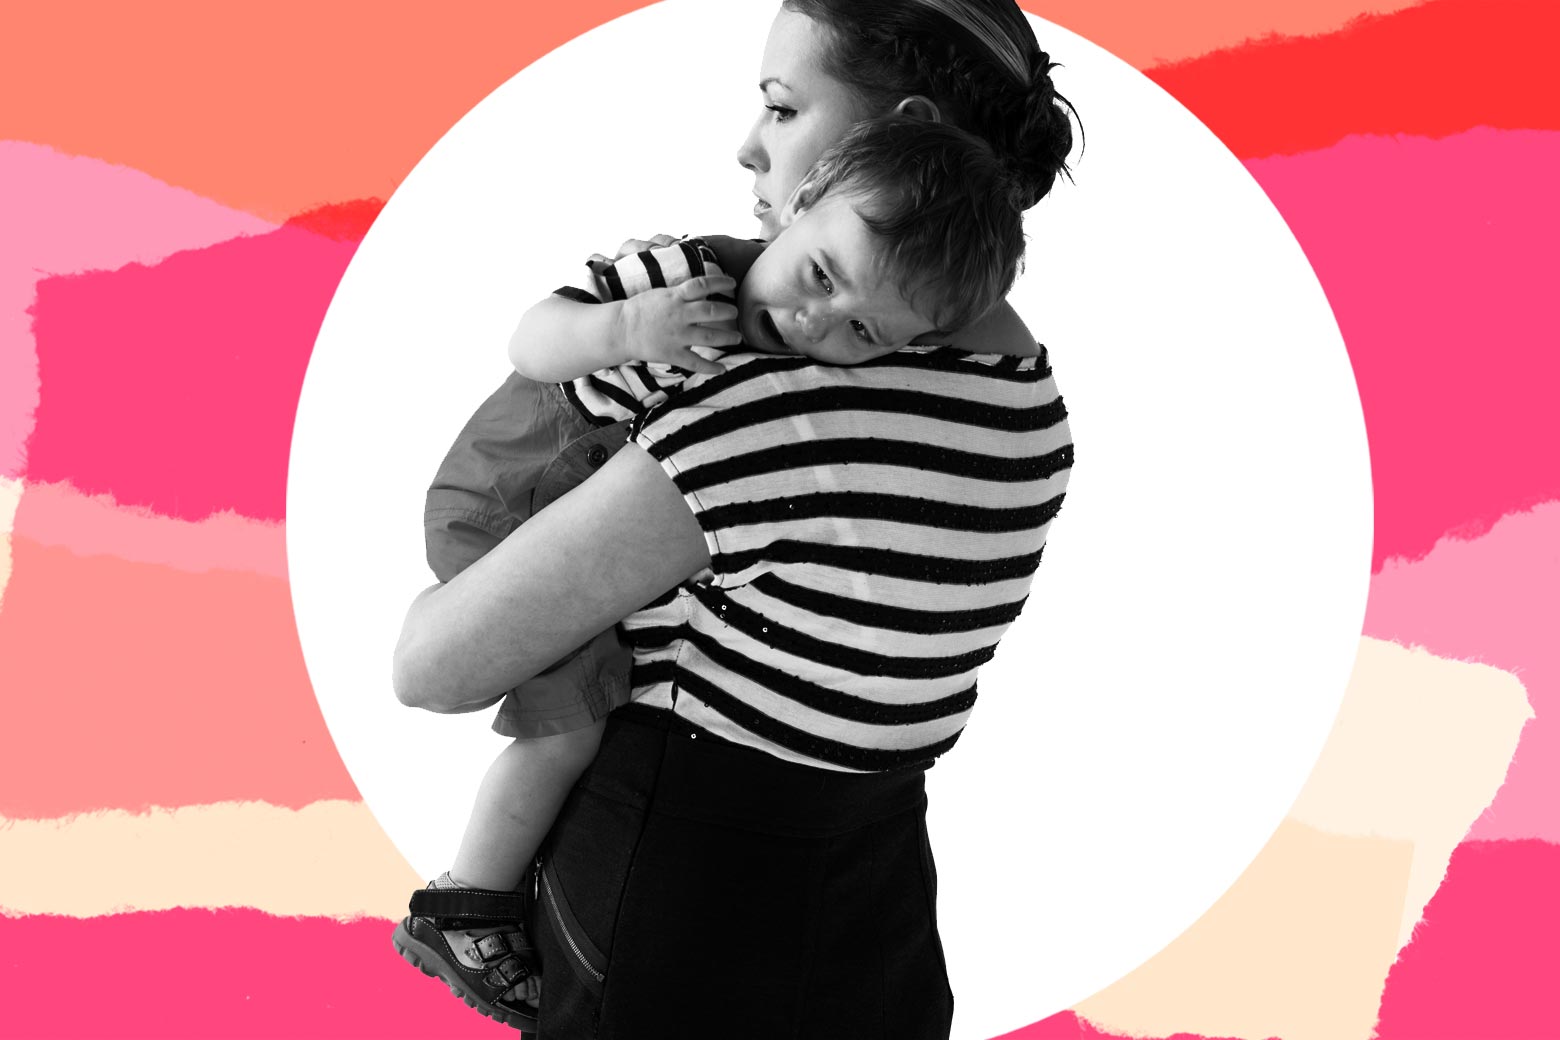 Photo illustration of a woman carrying a visibly upset baby.